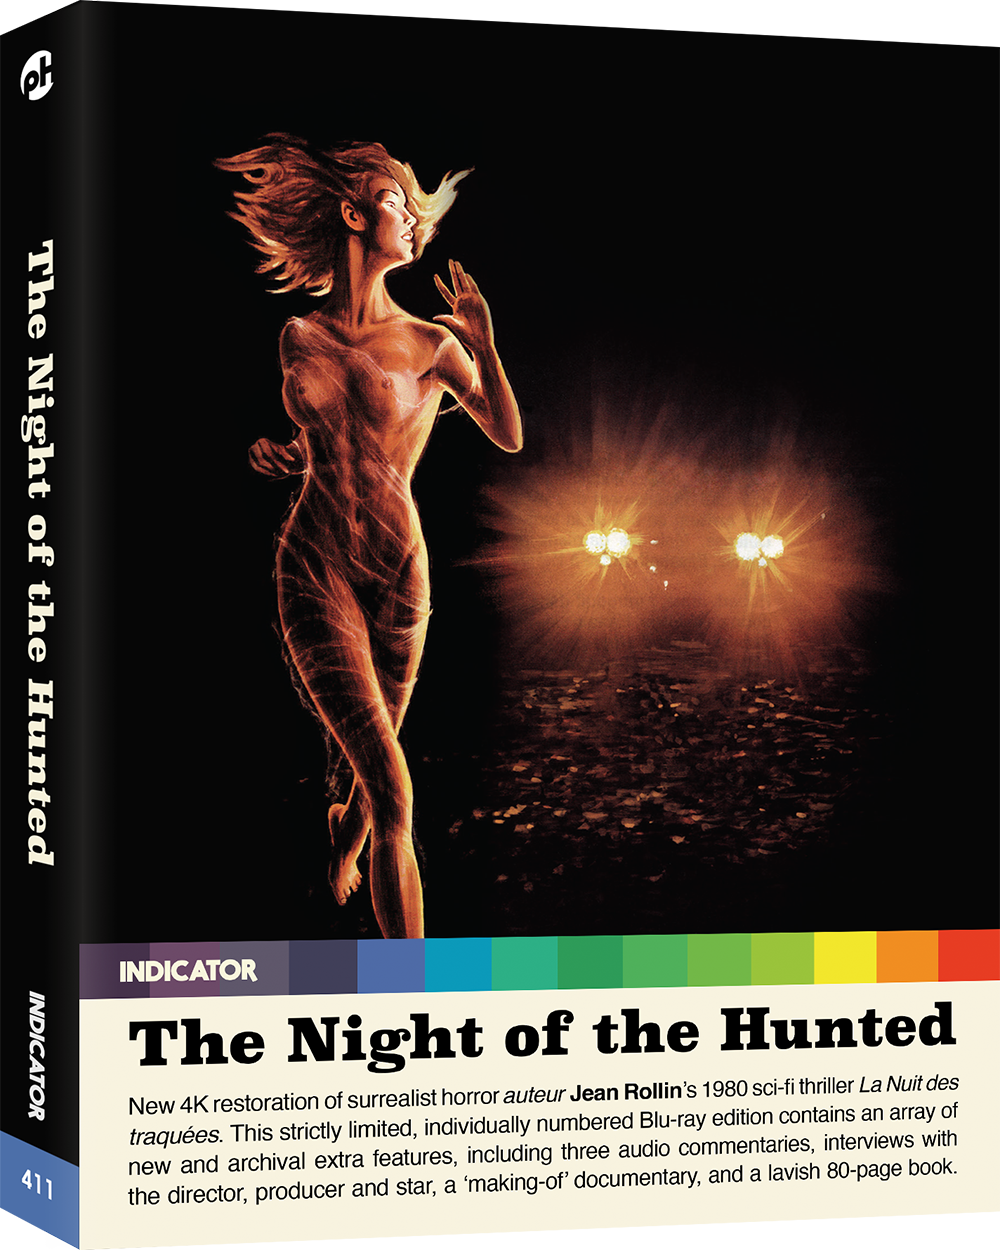 THE NIGHT OF THE HUNTED - Blu-ray LE